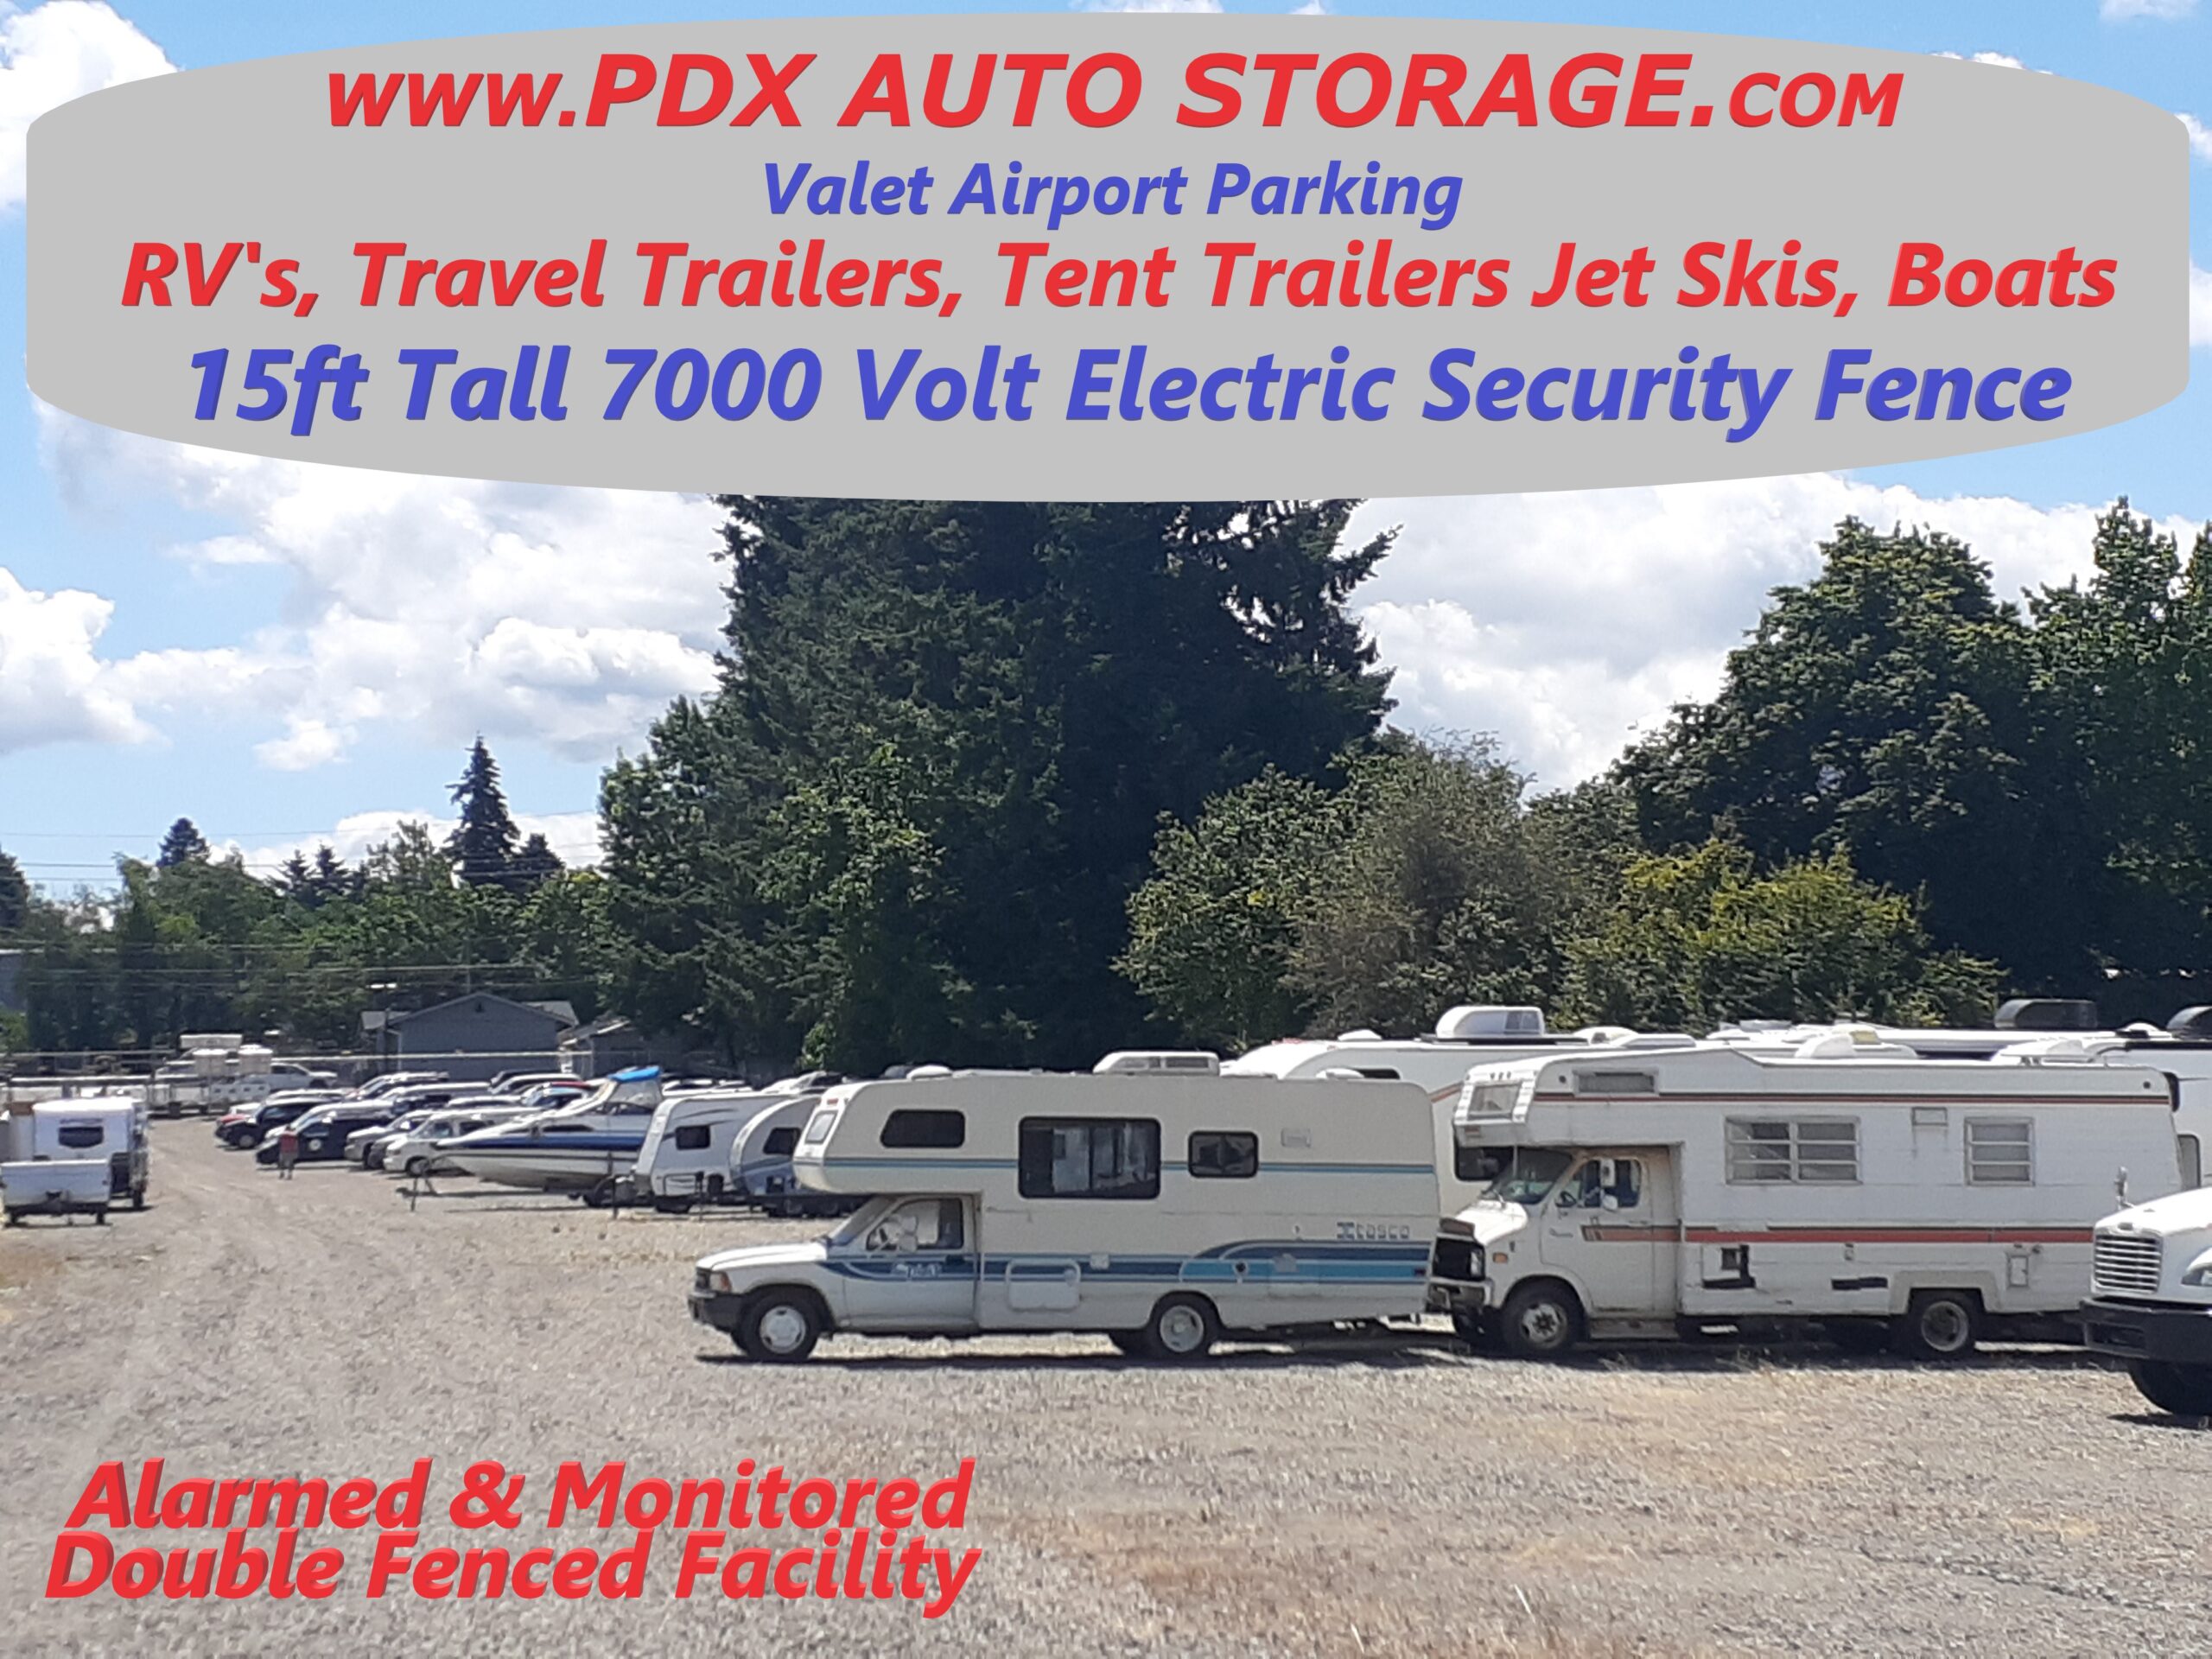 Looking to Store your Recreational Vehicle?